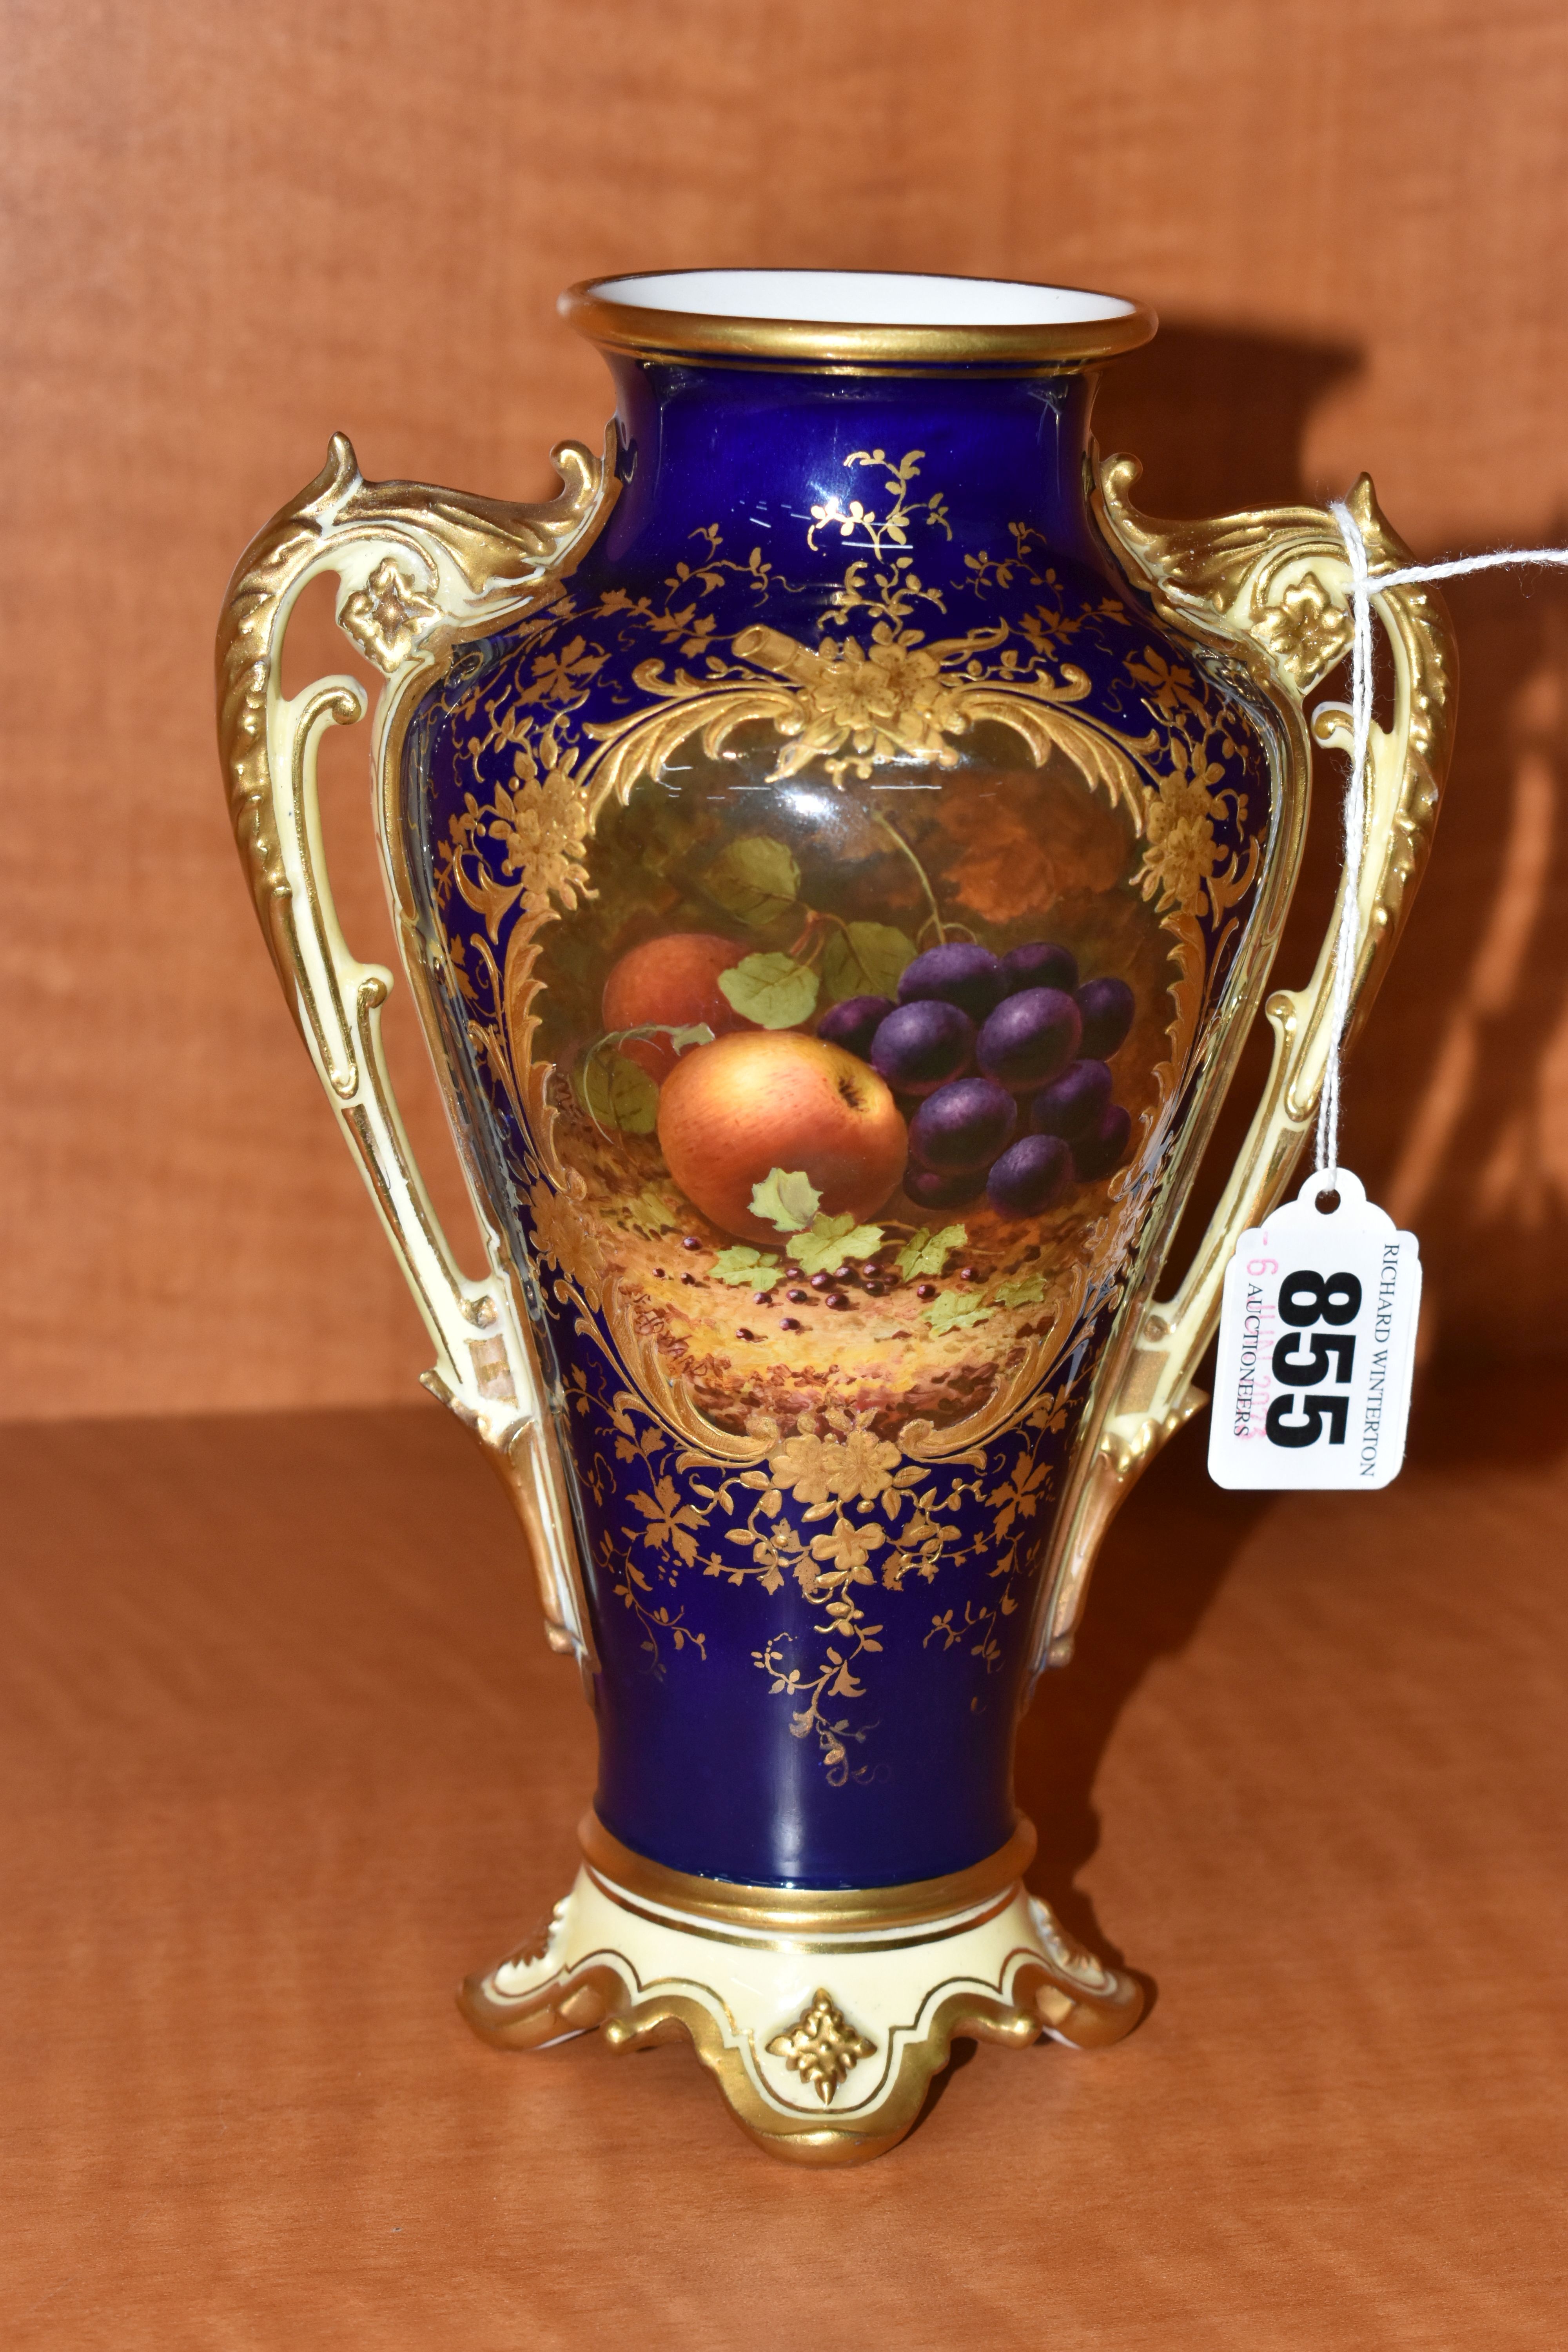 A LATE 19TH / EARLY 20TH CENTURY COALPORT TWIN HANDLED VASE, the blue, pale yellow and gilt ground